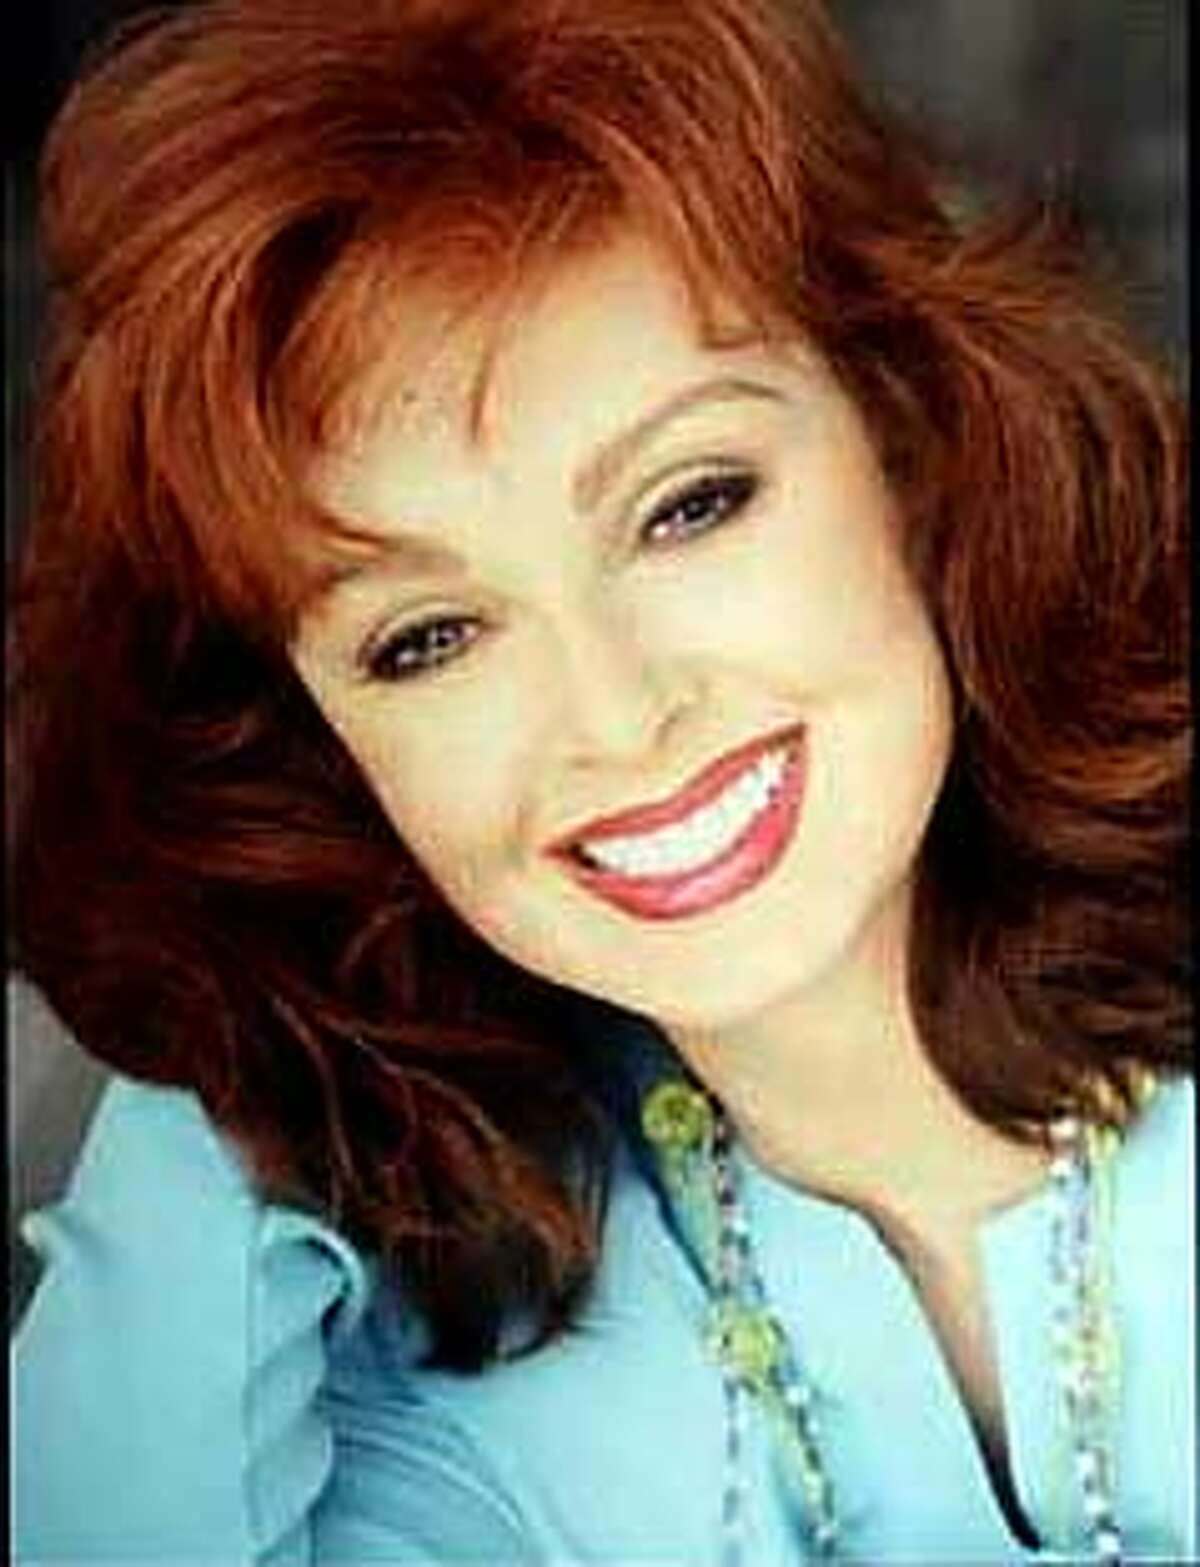 Naomi Judd, not ready for a "six-foot nap."